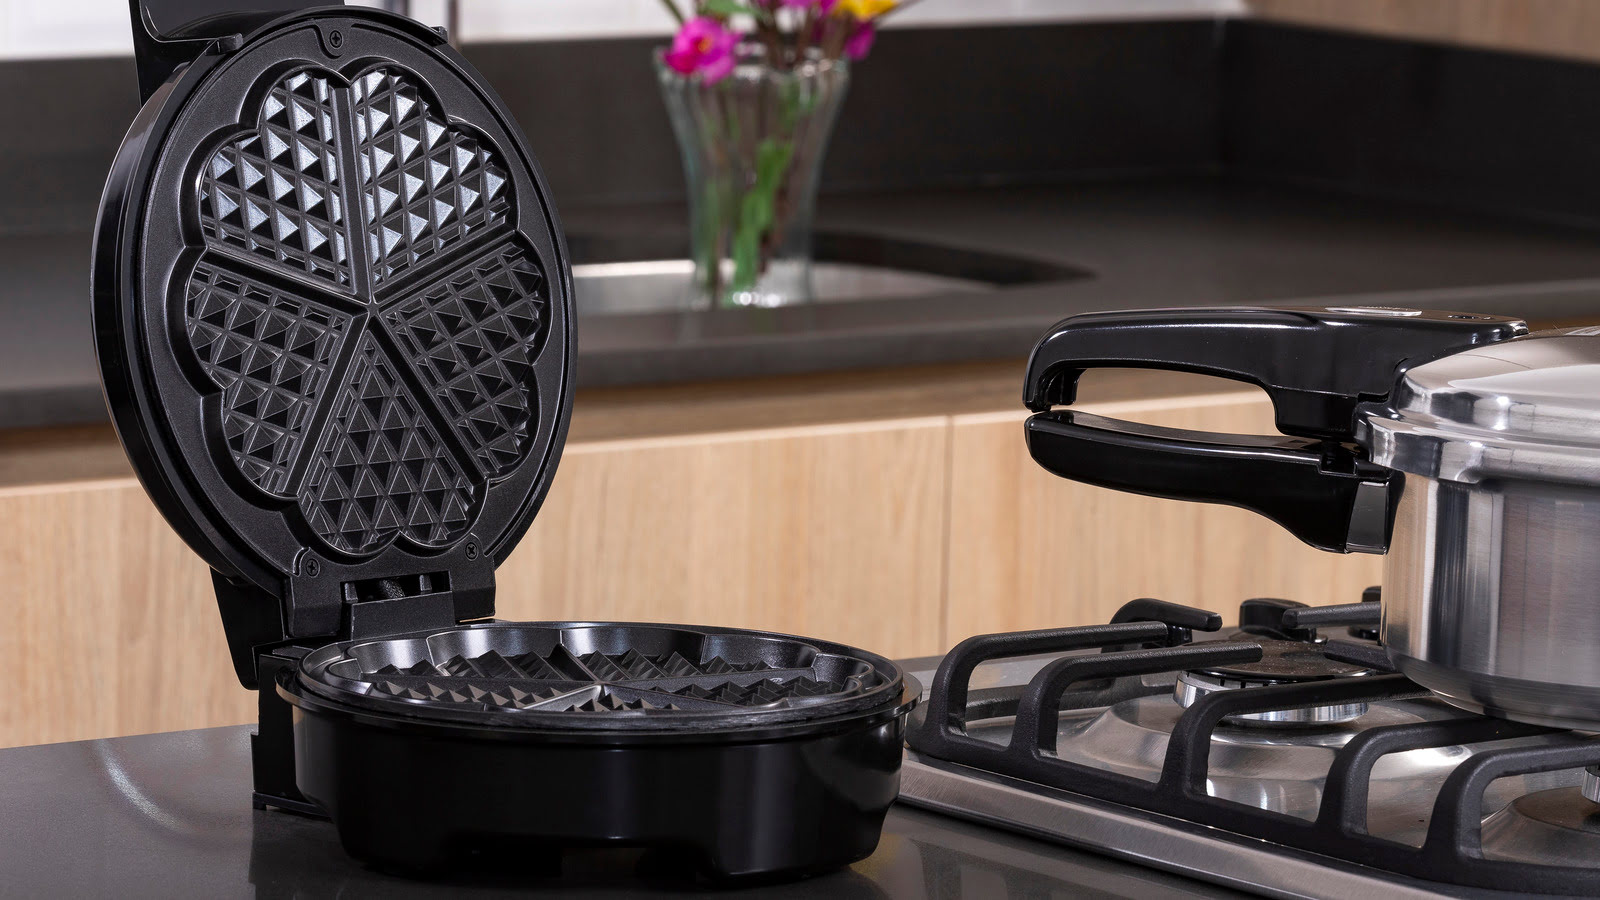 What Materials Is A Waffle Iron Made Of?